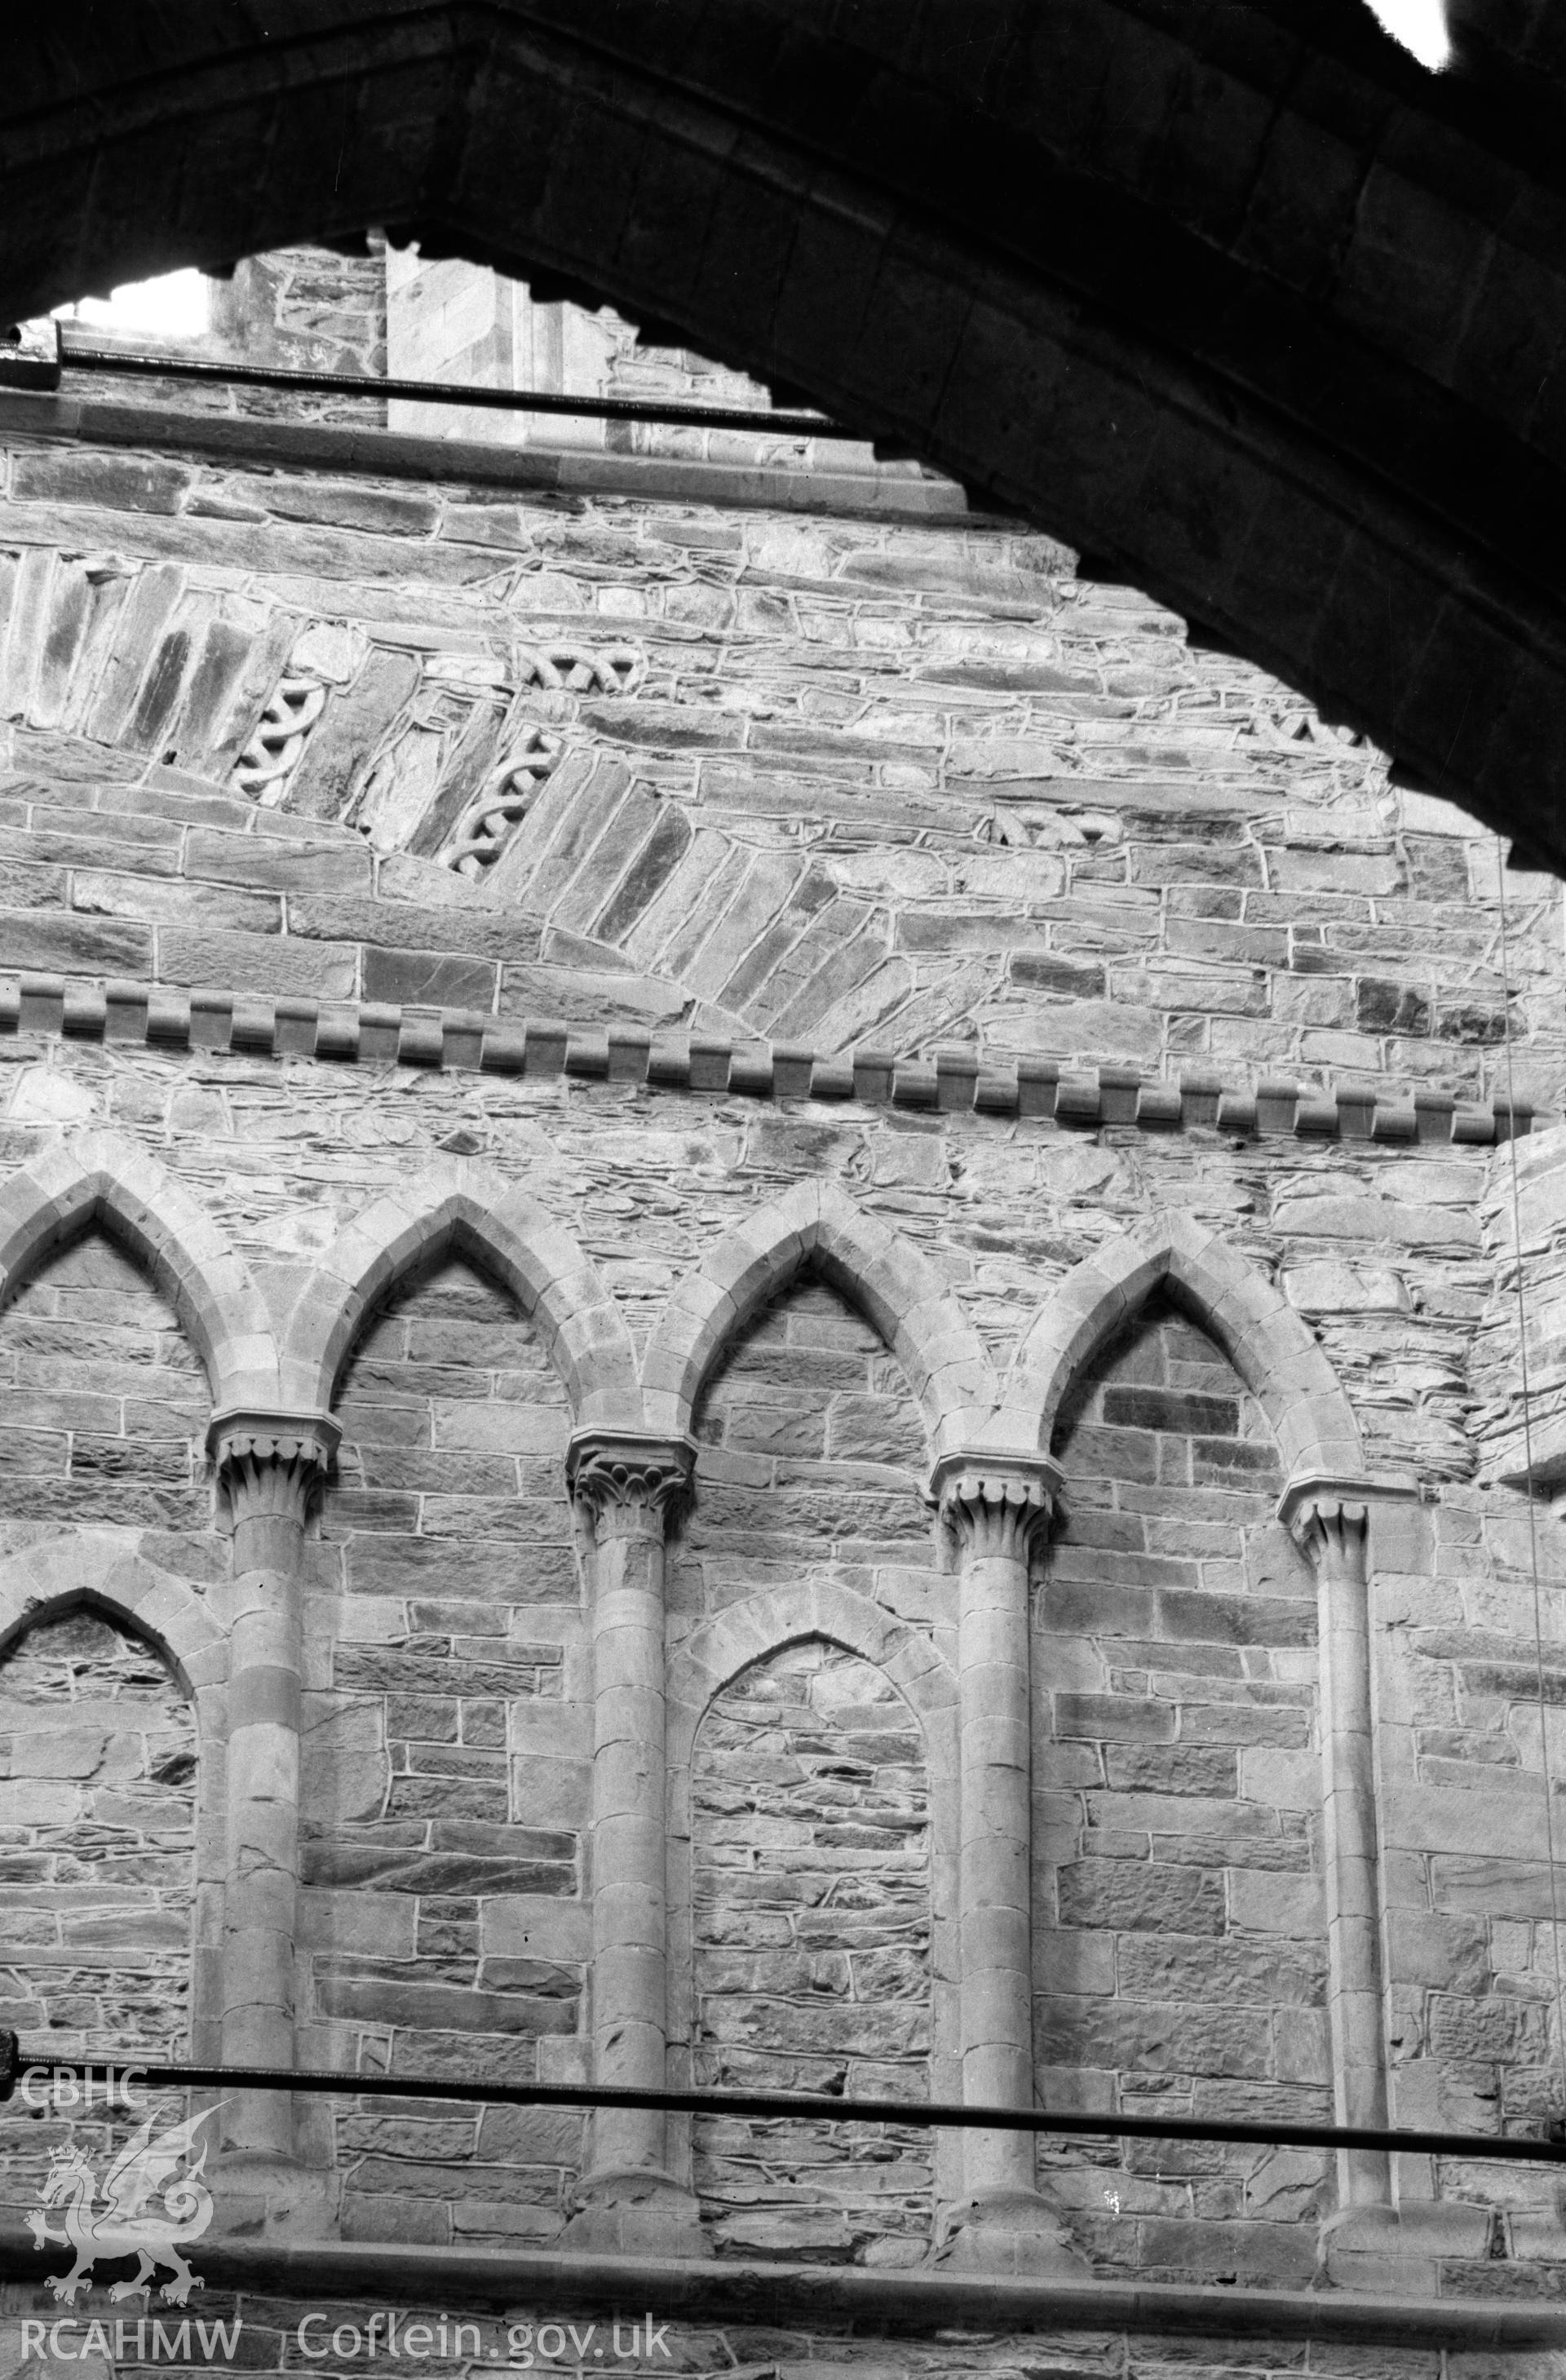 Digital copy of a black and white nitrate negative showing exterior view of engaged columns through arch at St. David's Cathedral, taken by E.W. Lovegrove, July 1936.